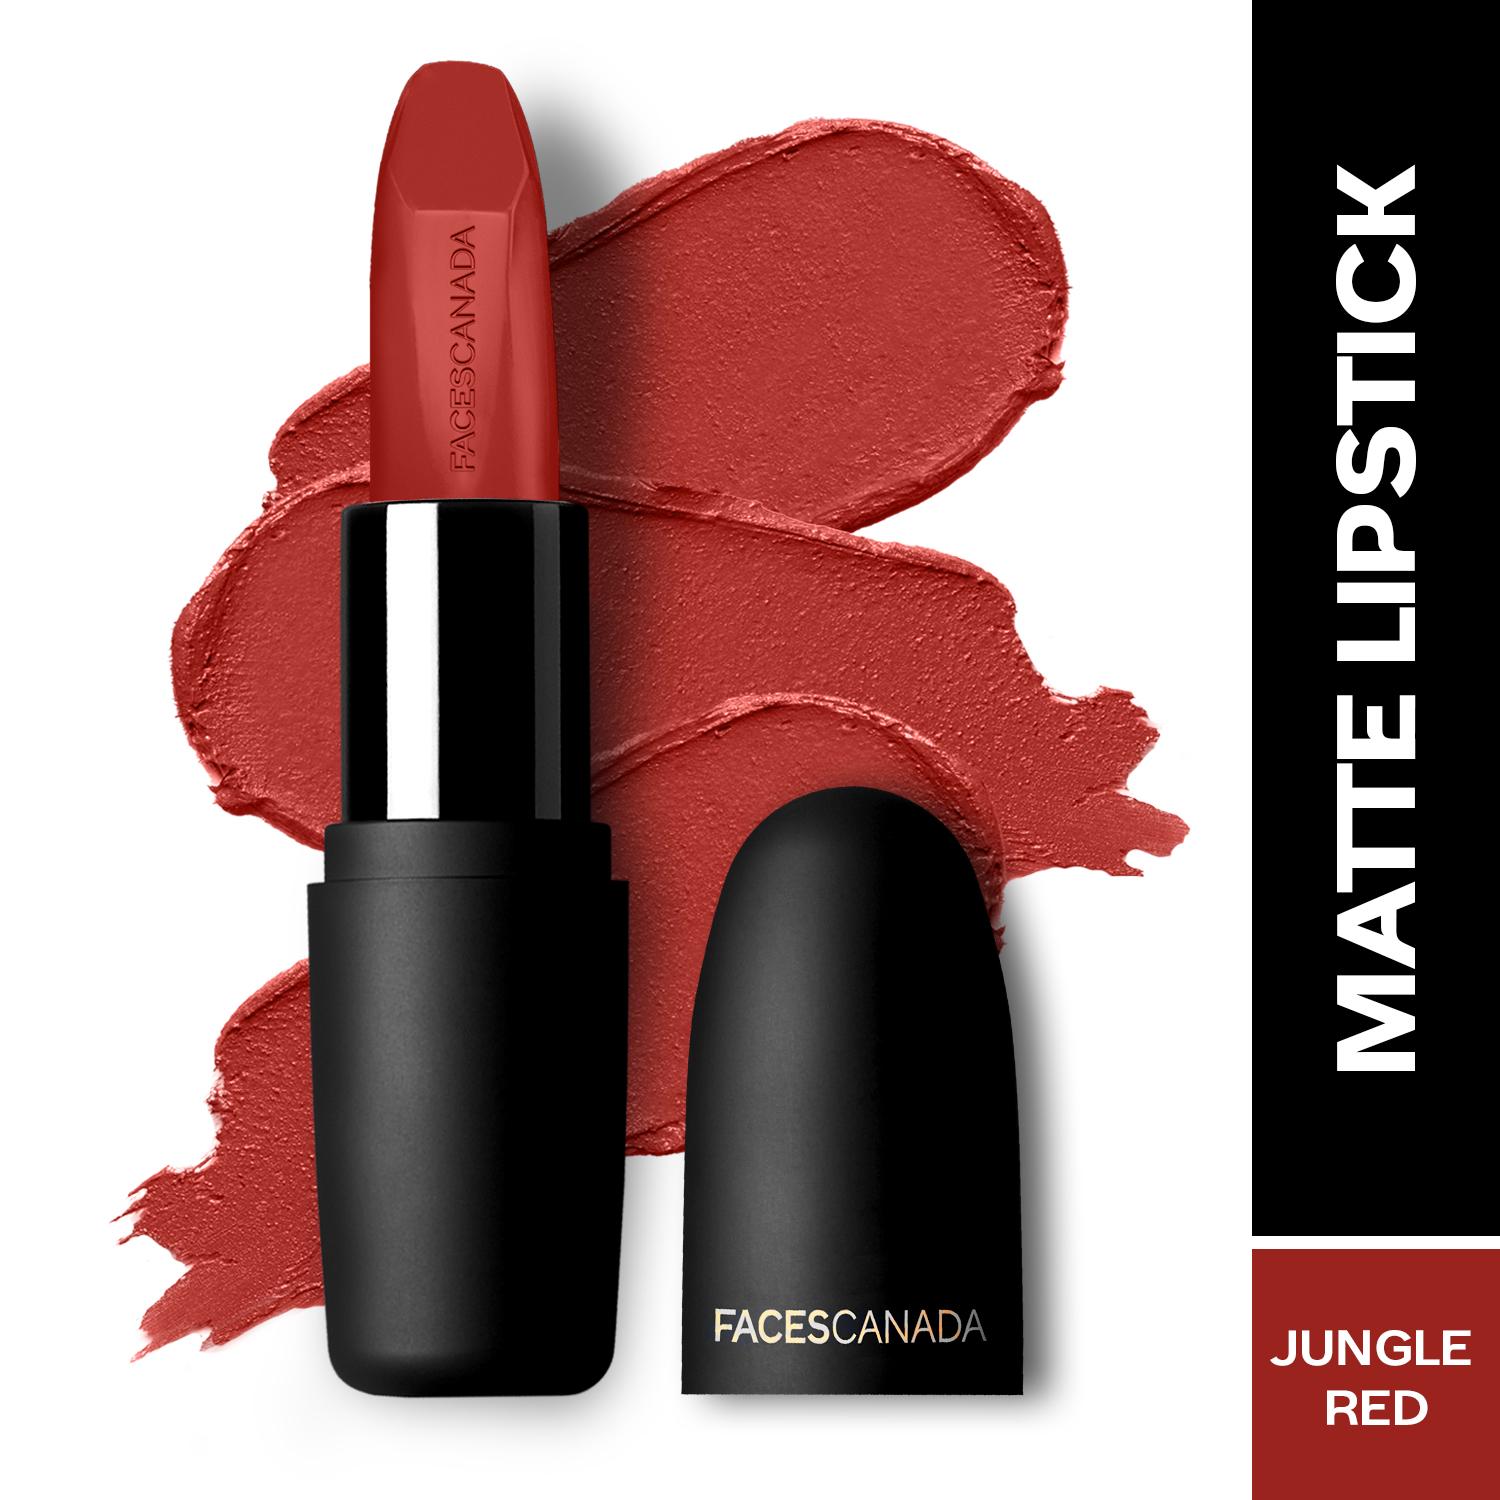 Faces Canada | Faces Canada Weightless Matte Lipstick, Pigmented and Hydrated Lips - Jungle Red 29 (4.5 g)